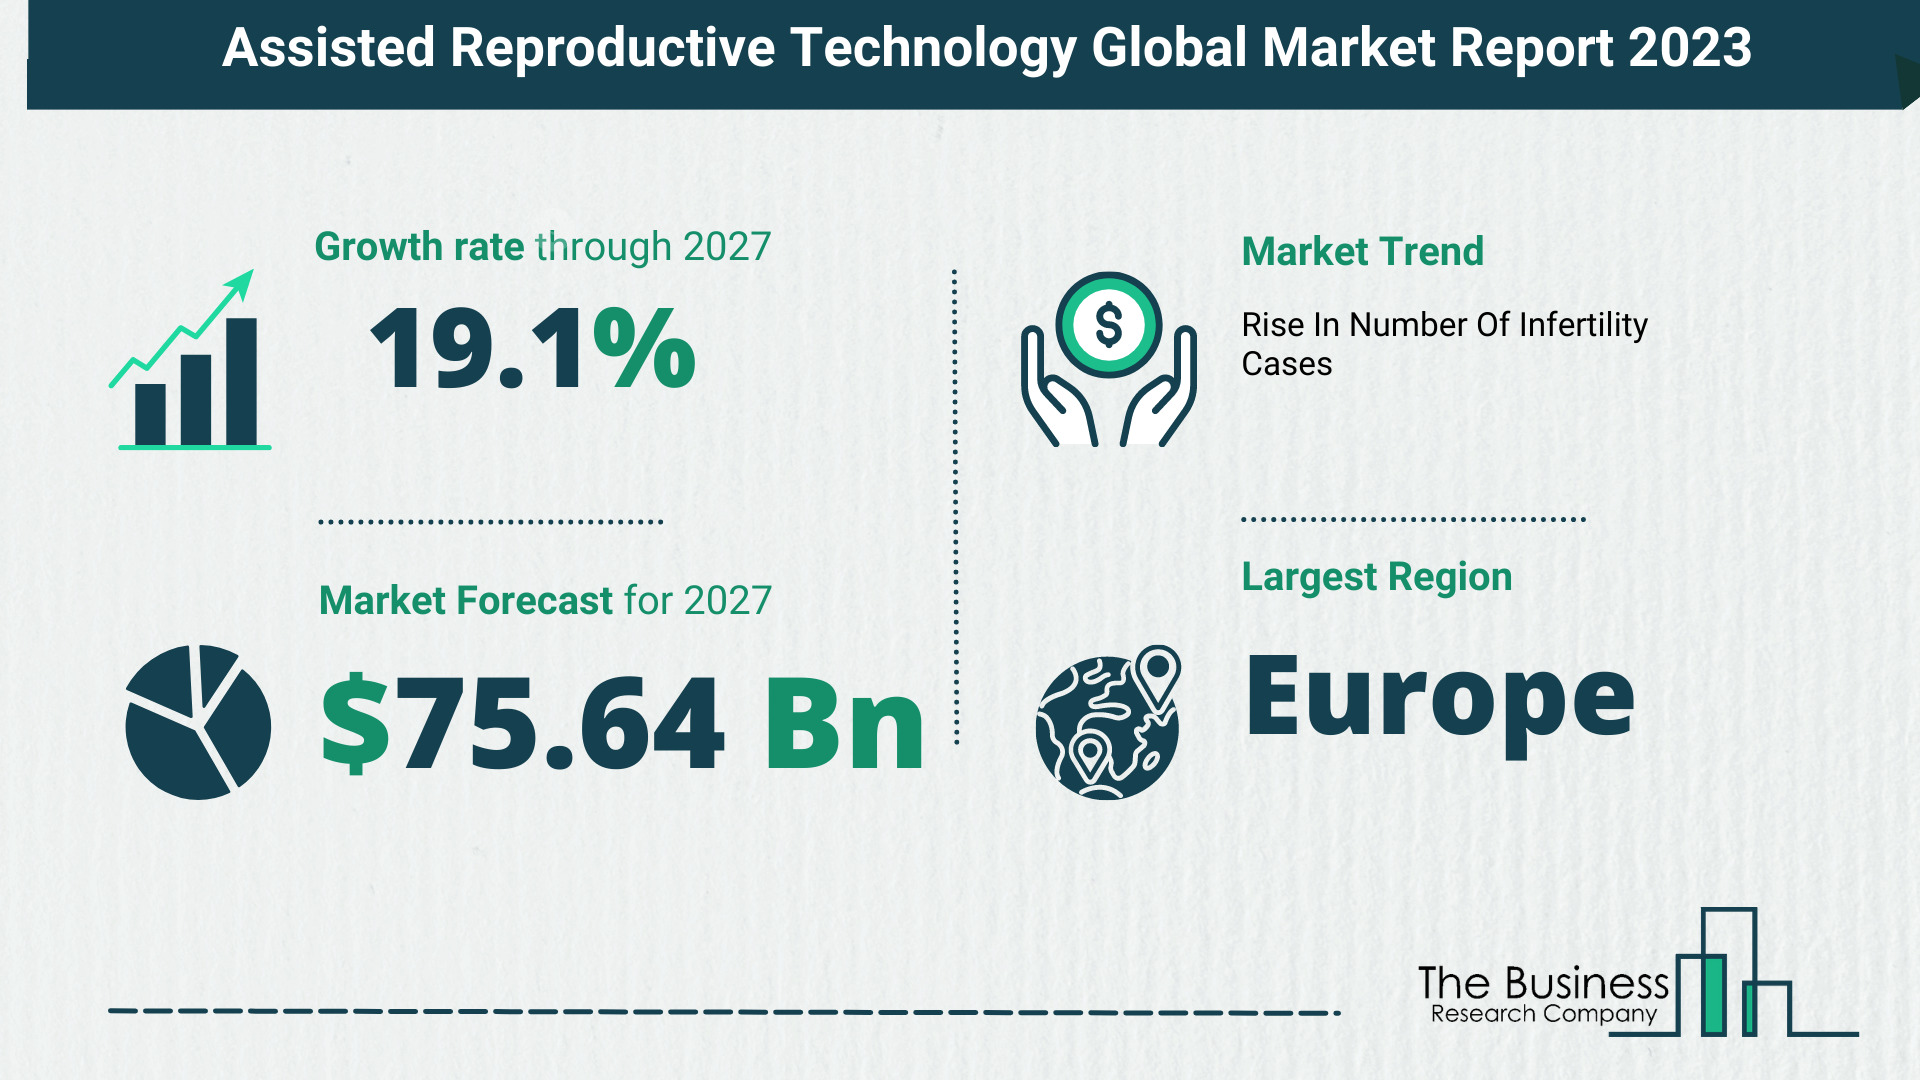 How Will The Assisted Reproductive Technology Market Size Grow In The Coming Years?